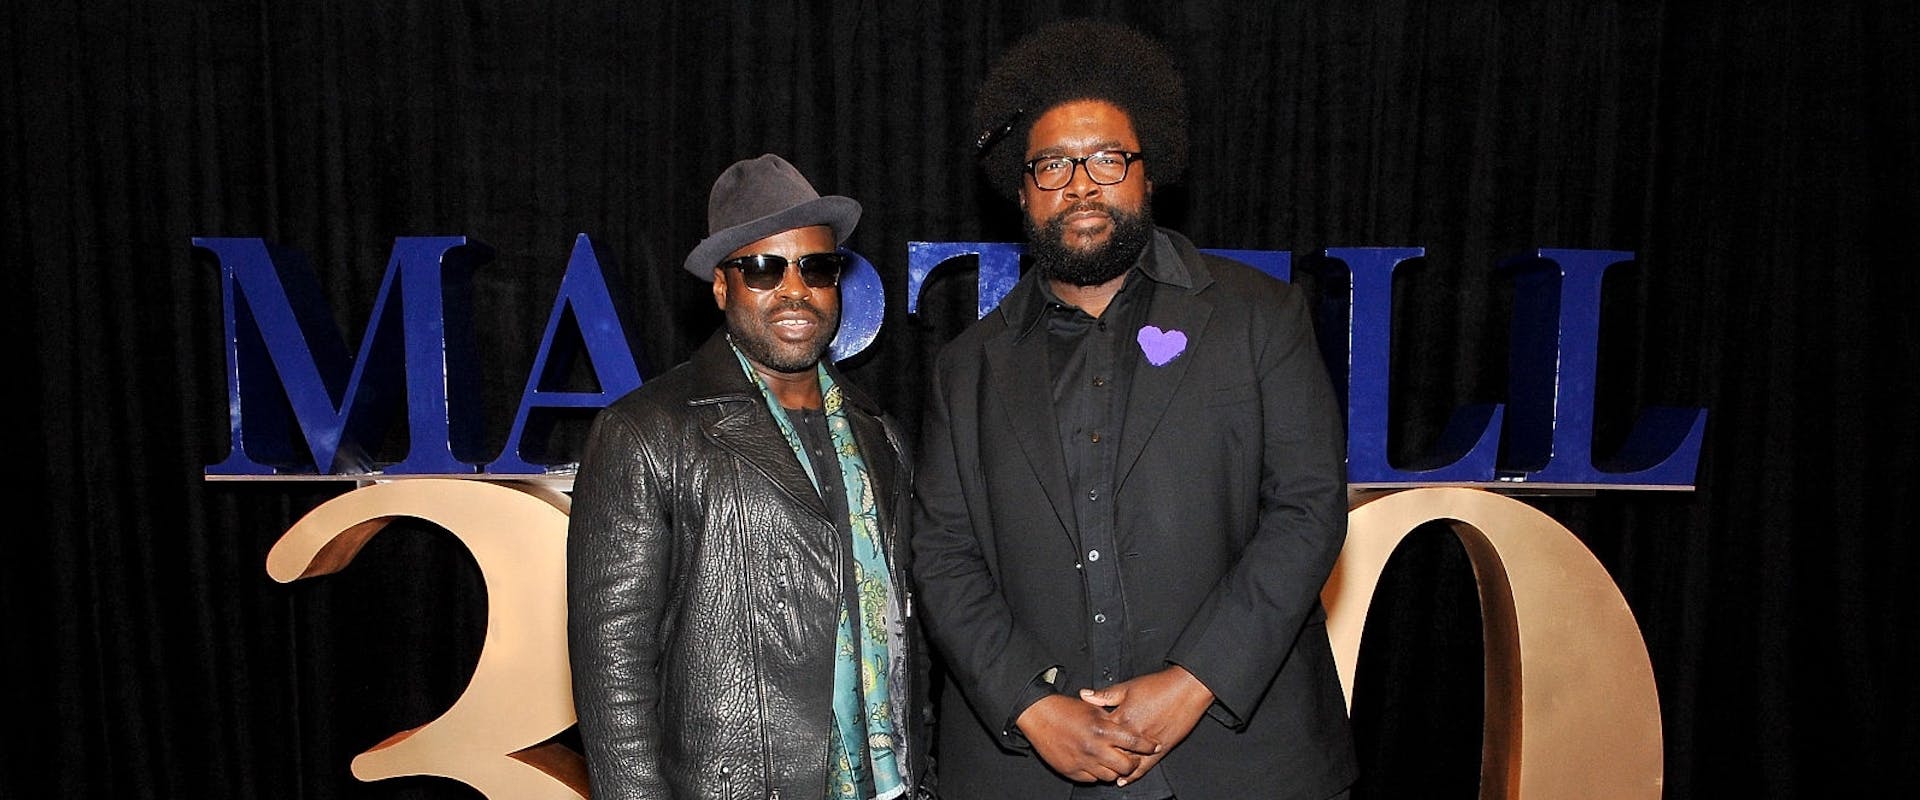 DJ Questlove (R) and Black Thought of The Roots at the Martell 300th Anniversary Celebration at New York Citys One World Trade Centeron September 16, 2015 in New York City.